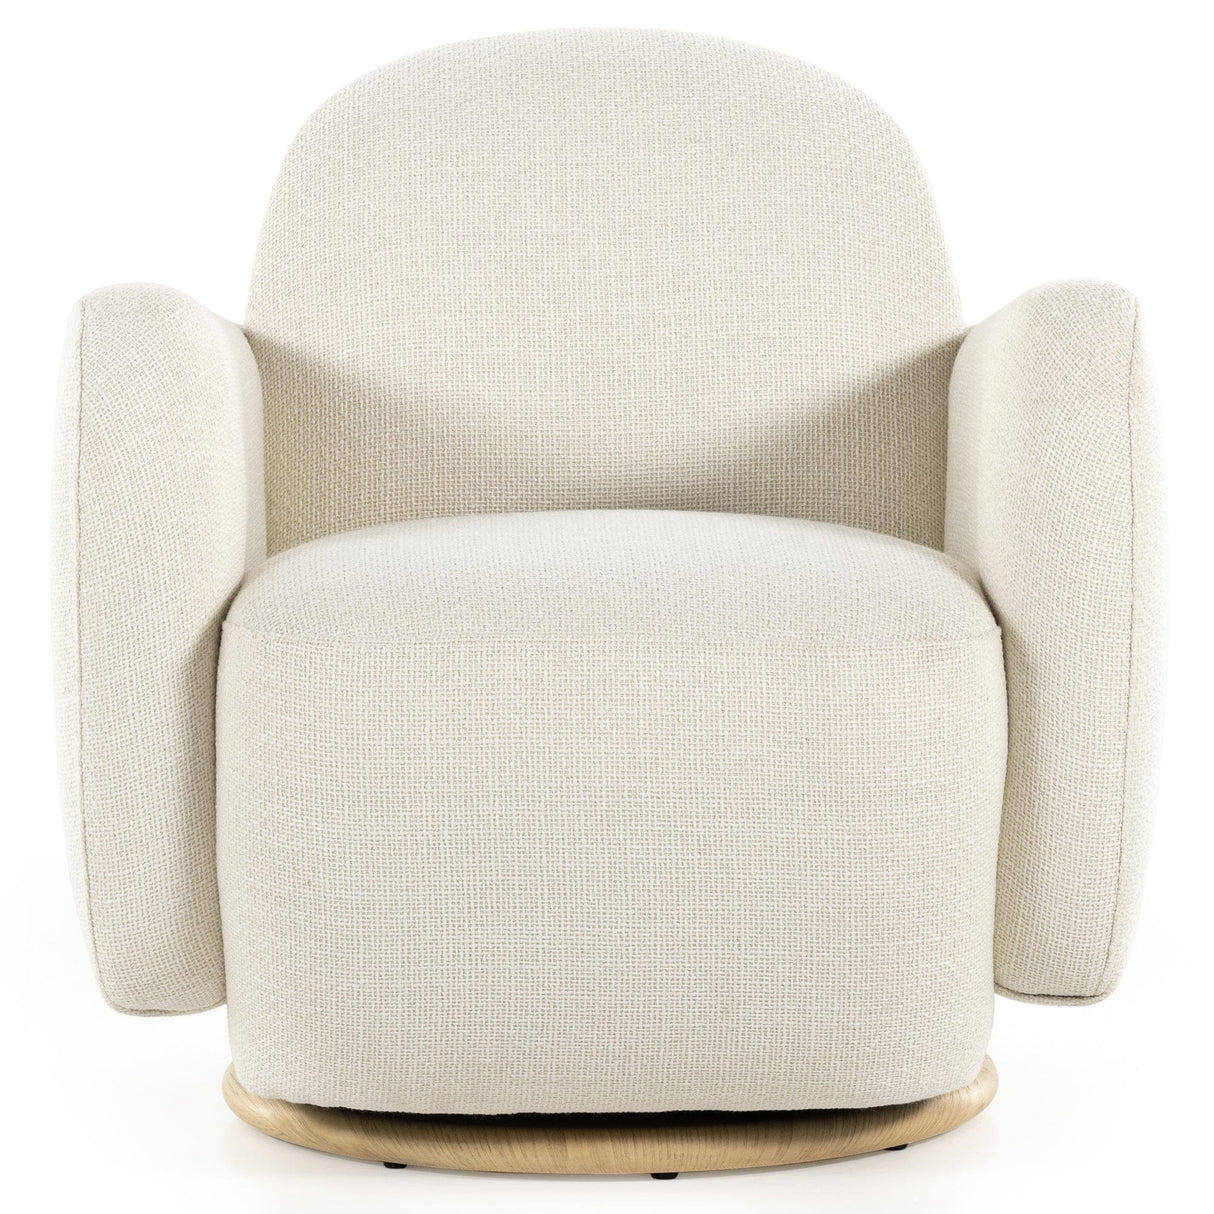 Four Hands Enya Swivel Chair Furniture four-hands-227371-001 801542742485